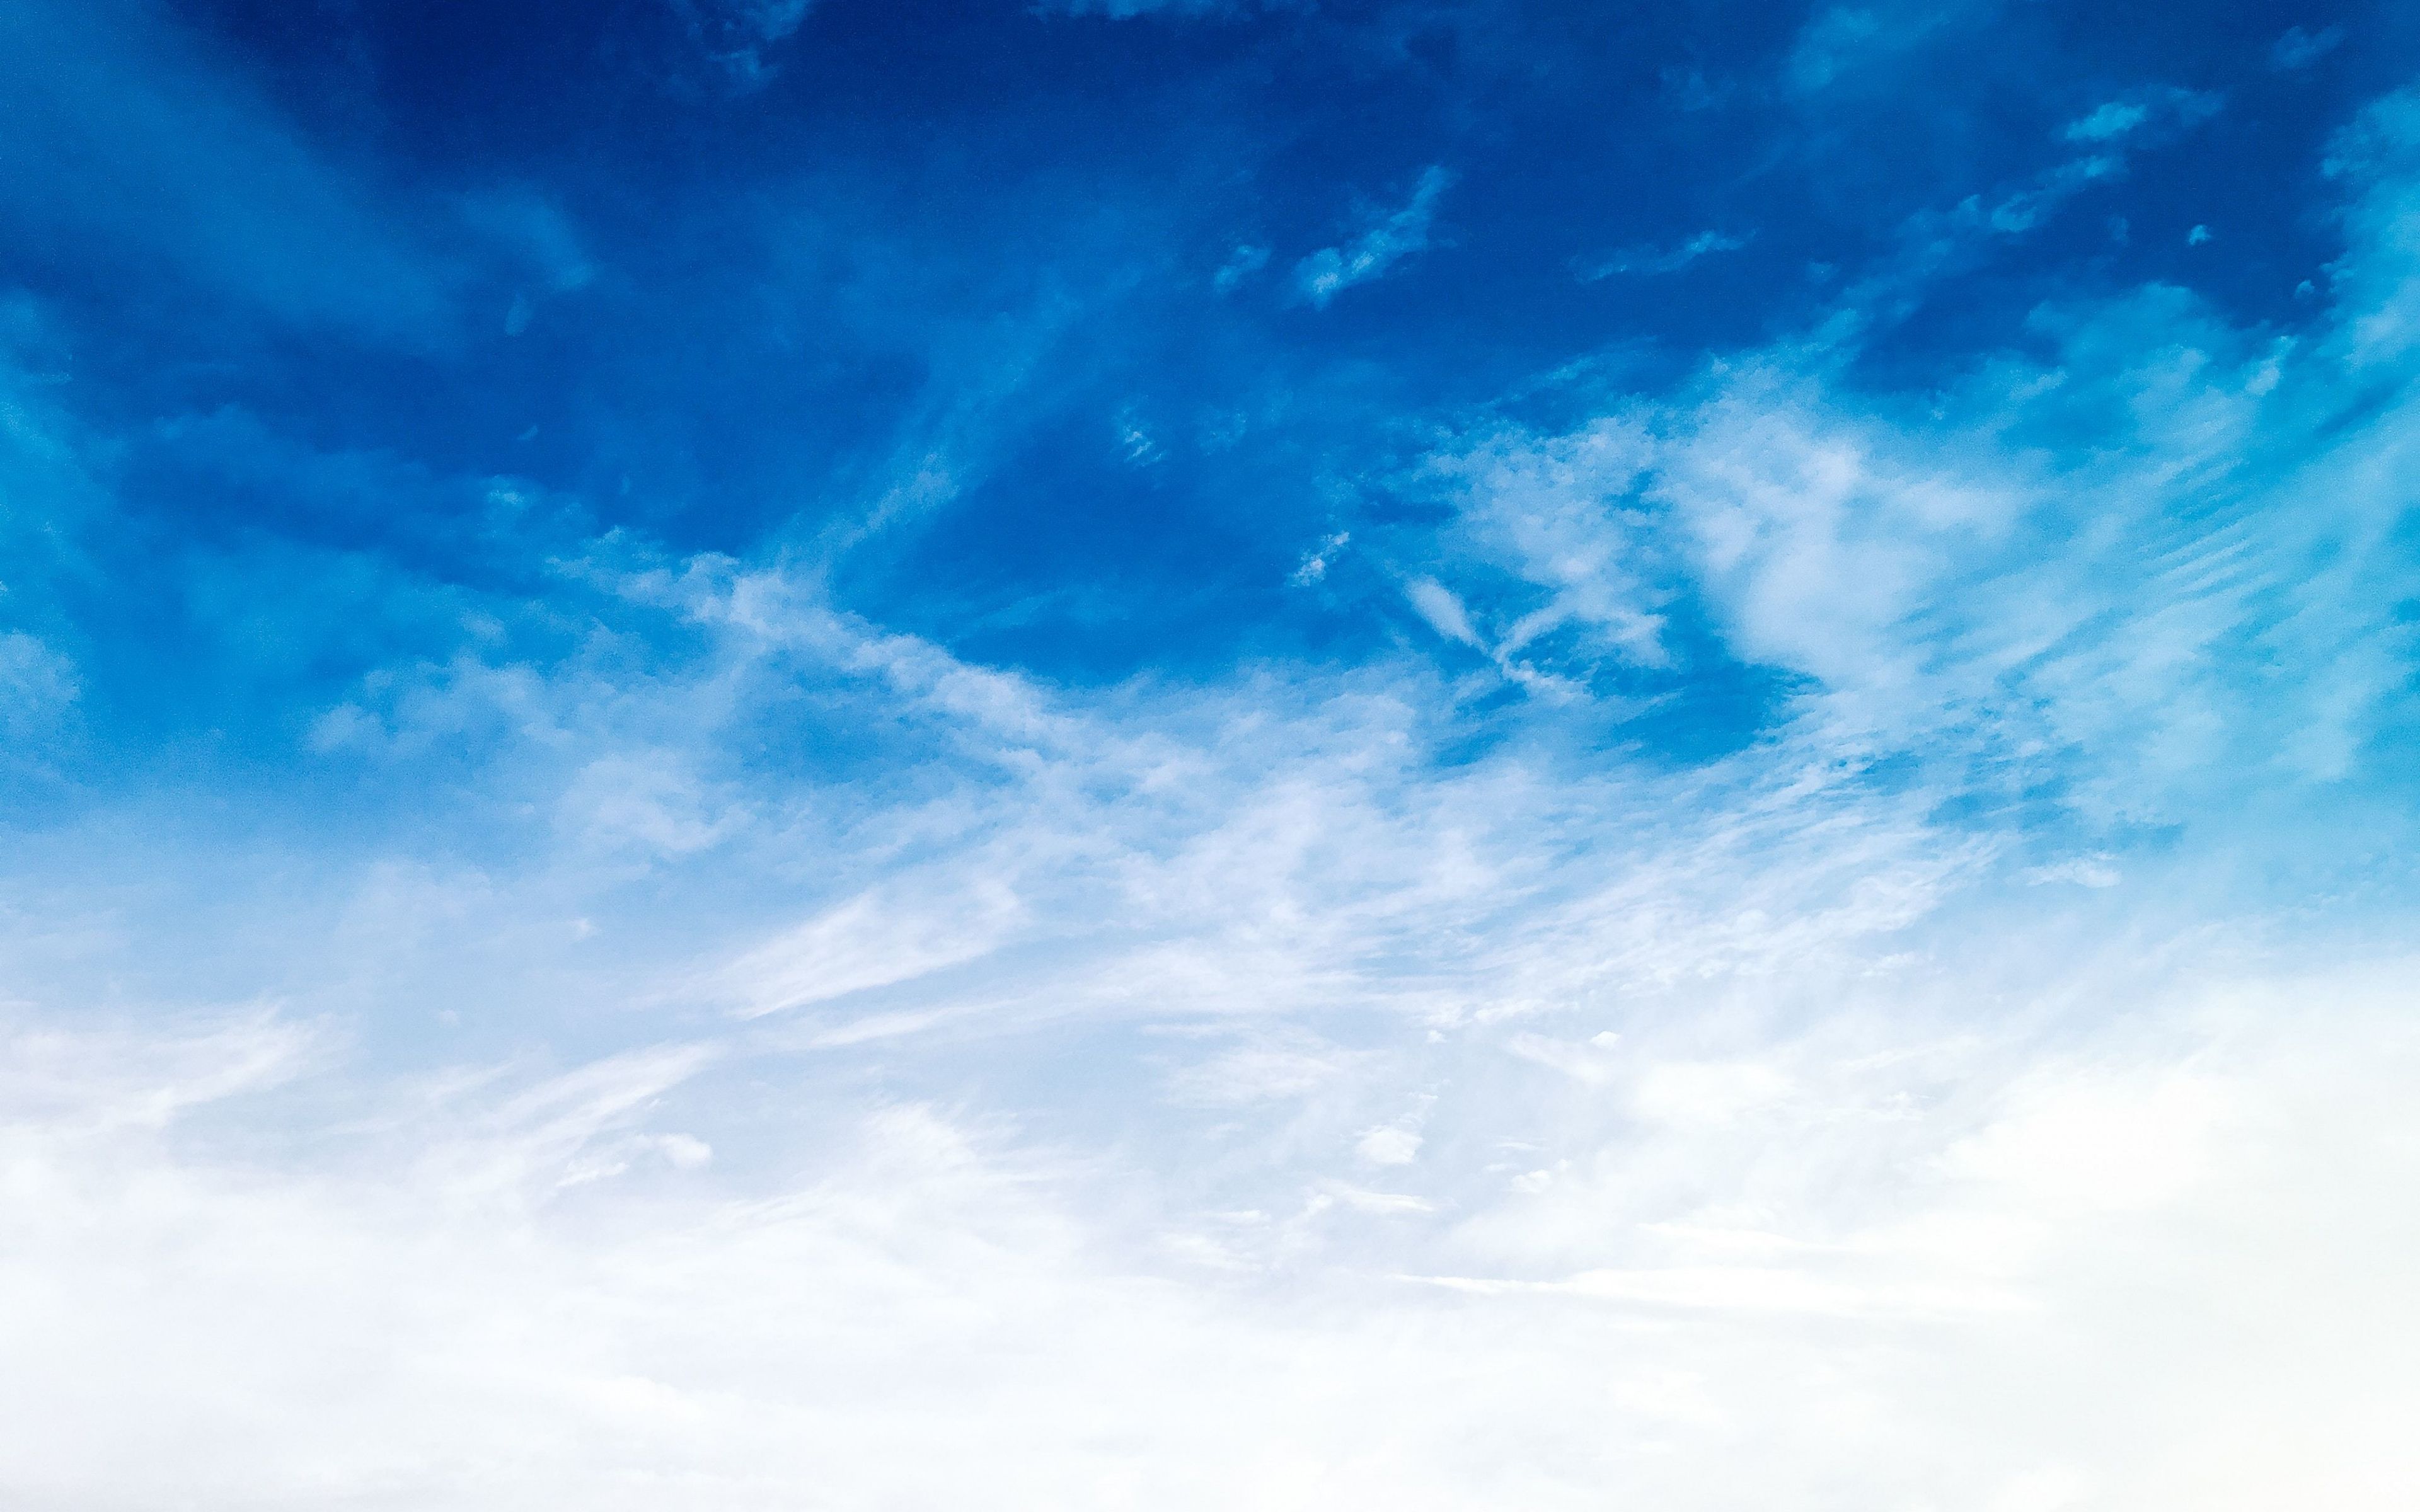 Download 3840x2400 wallpaper clouds and blue sky, sunny day, 4k, ultra HD 16: widescreen, 3840x2400 HD image, background, 10815